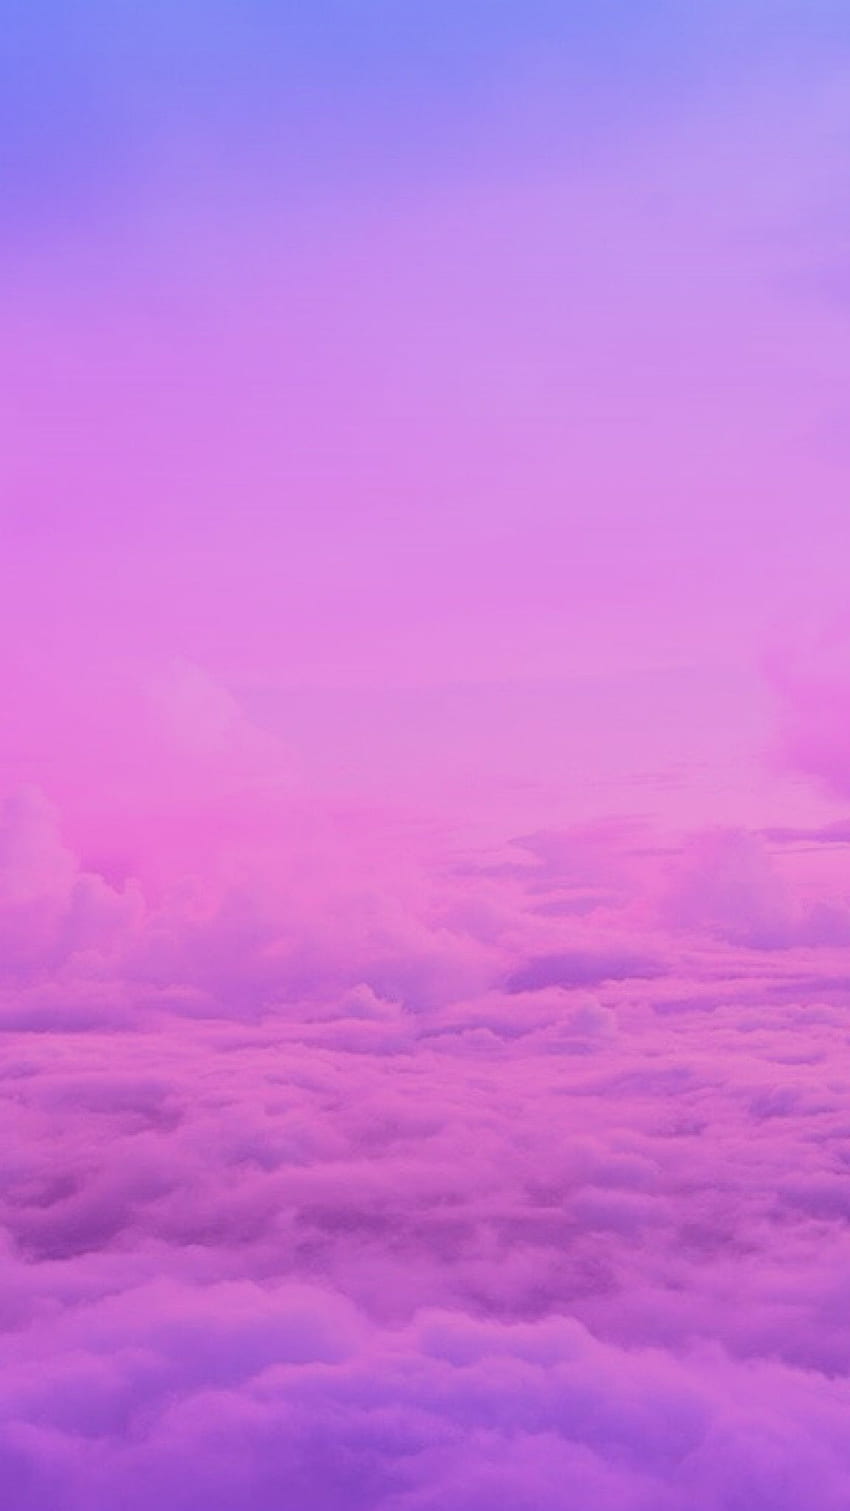 Original not by me! I just made the ombré/gradient., Pink Dynamic HD phone wallpaper